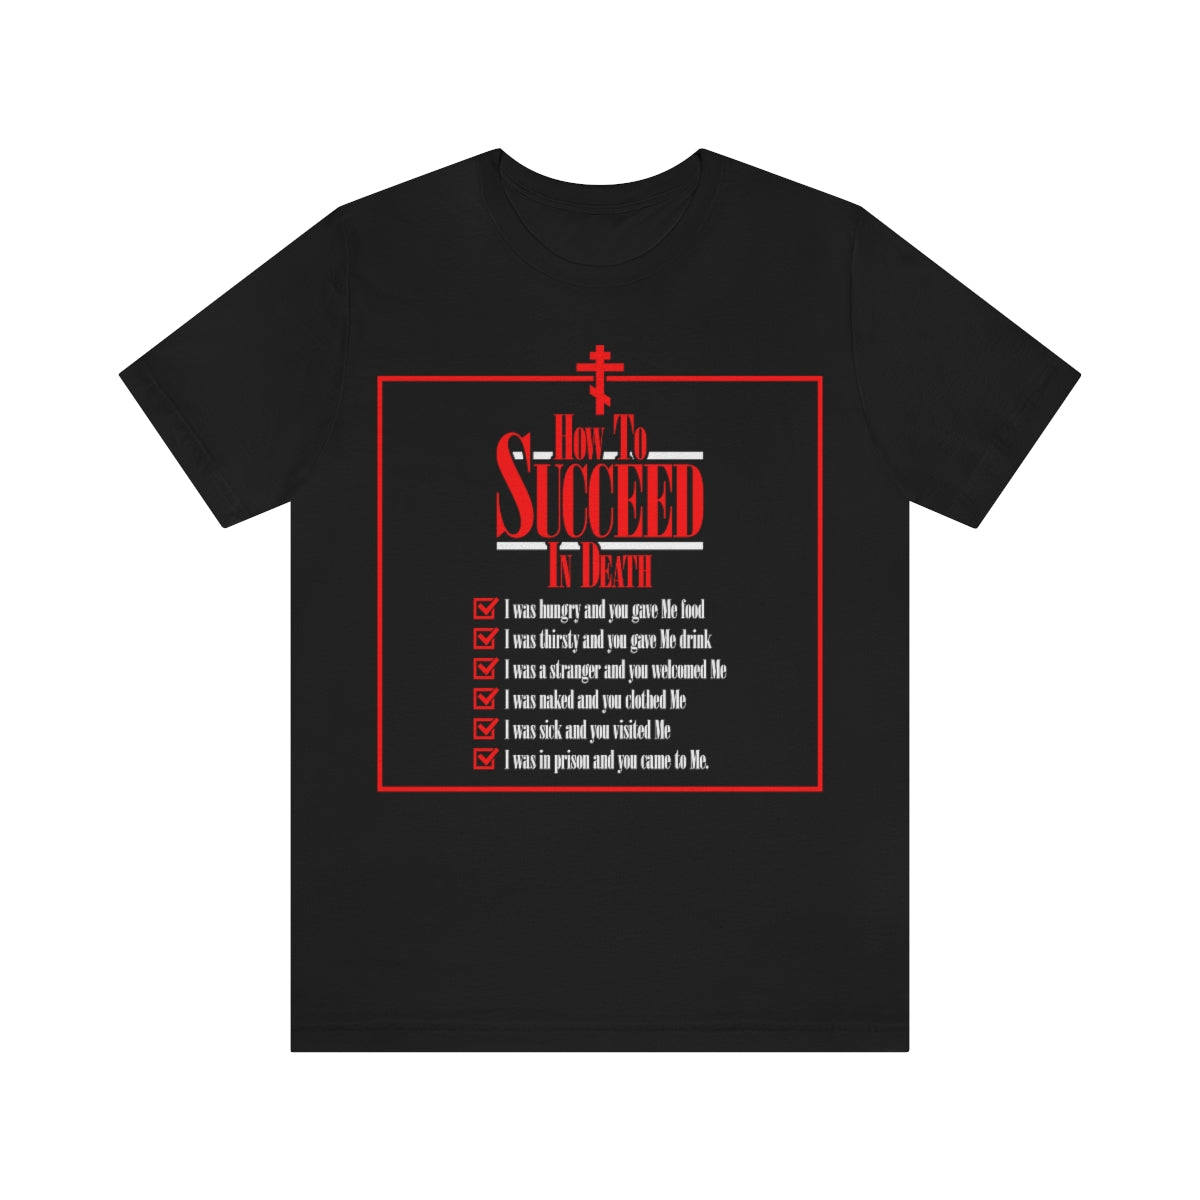 How to Succeed in Death No. 1 | Orthodox Christian T-Shirt